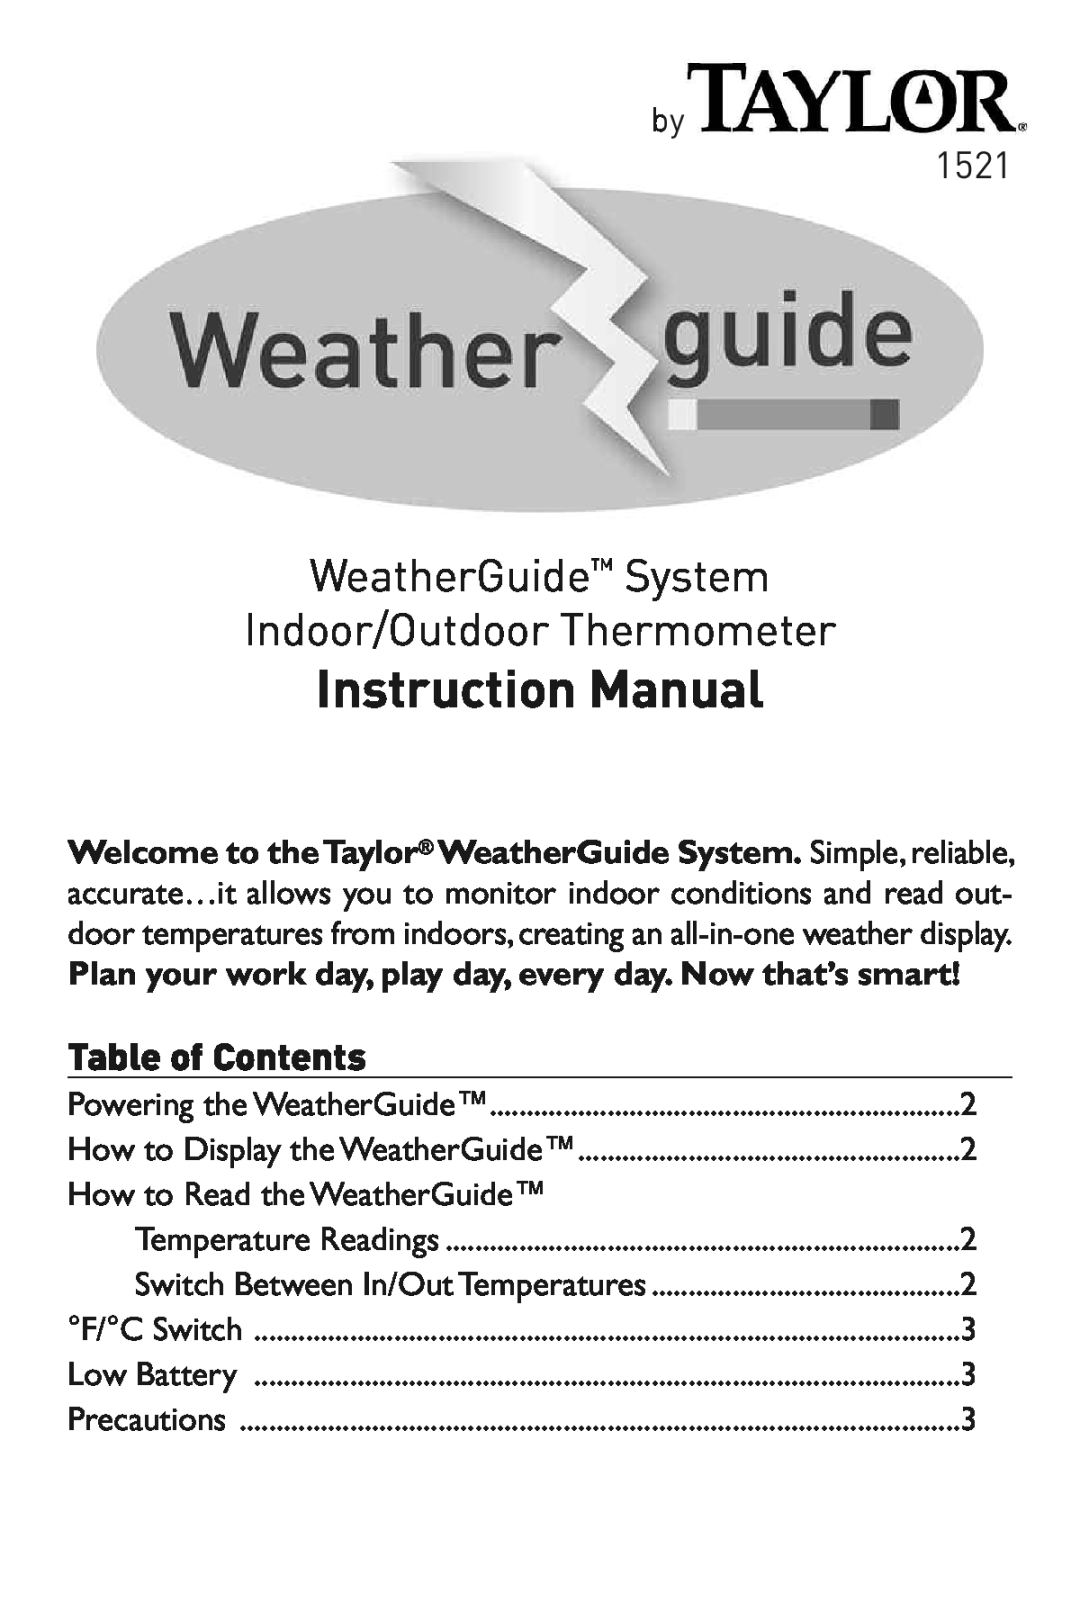 Taylor 1521 instruction manual Powering the WeatherGuide, How to Display the WeatherGuide, Temperature Readings 